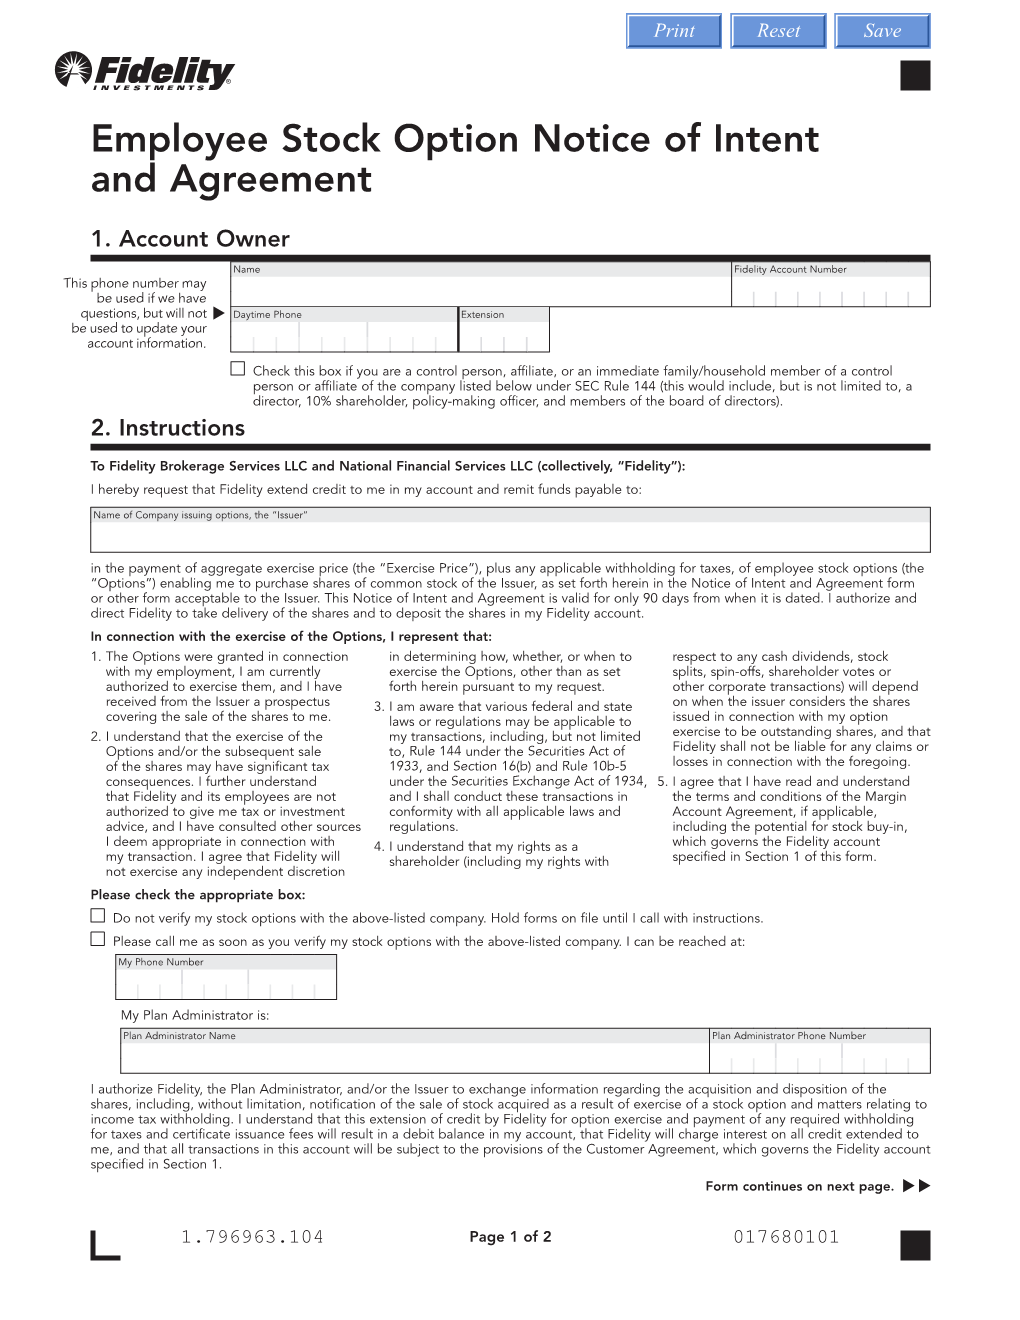 Employee Stock Option Notice of Intent and Agreement (PDF)